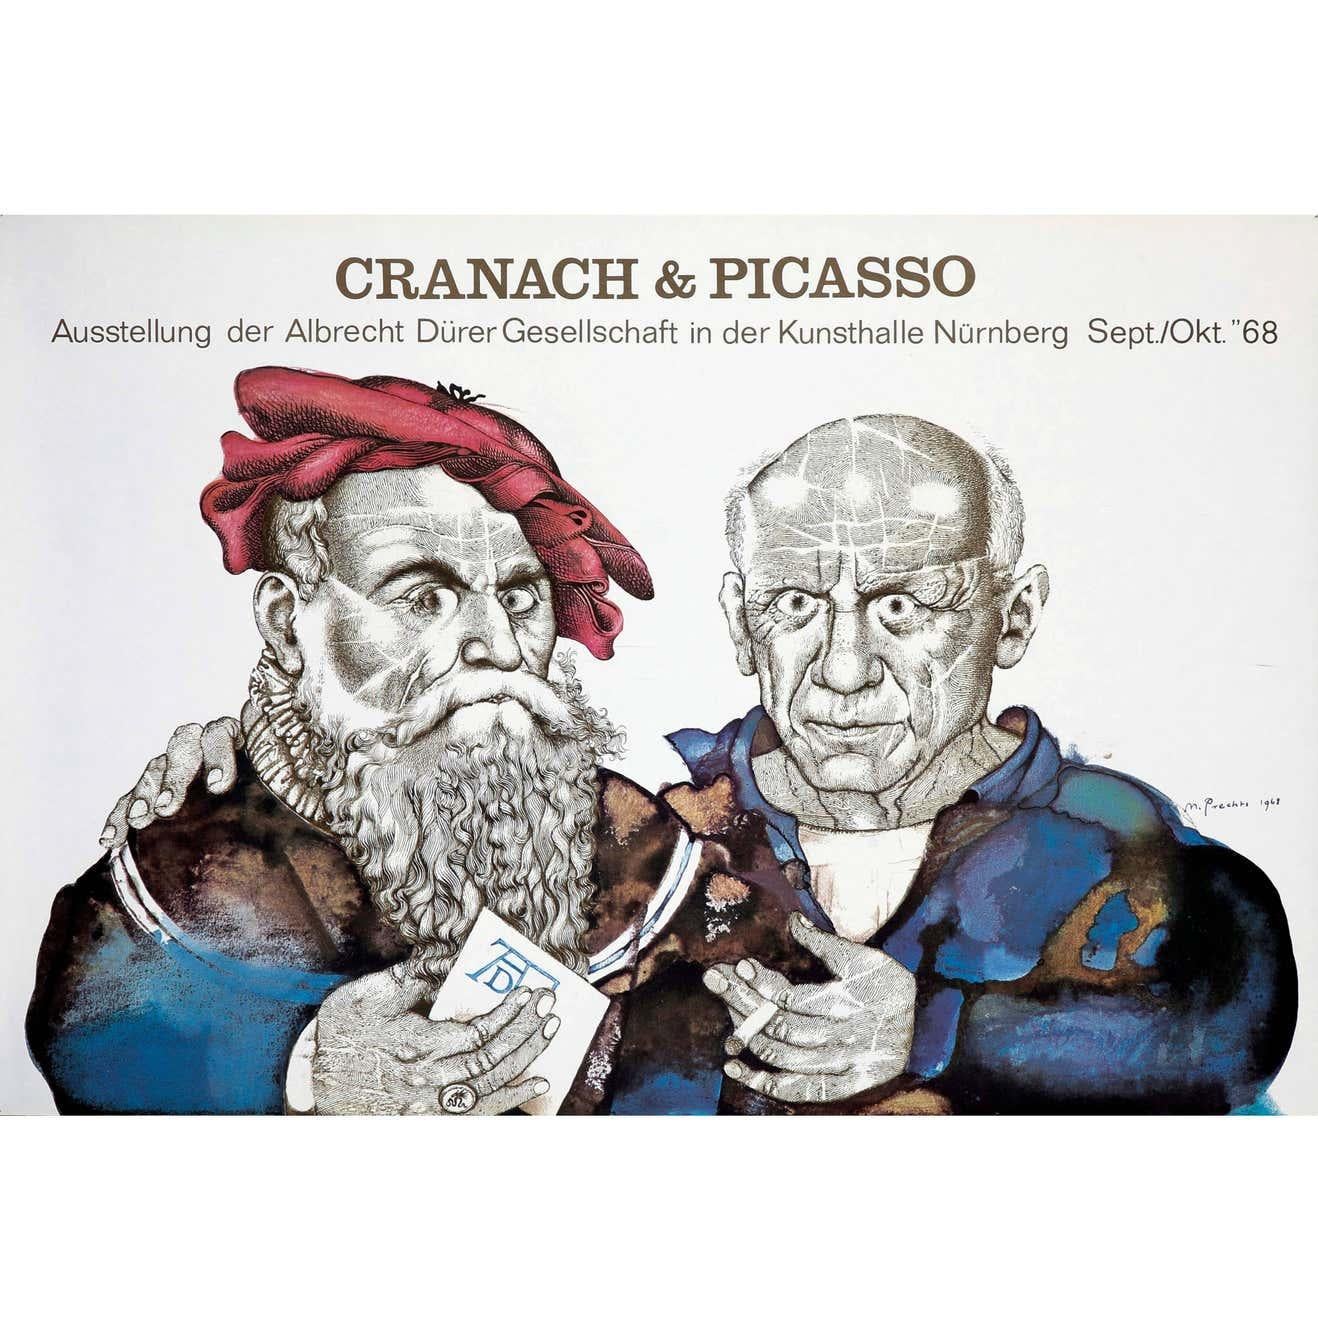 Michael Mathias Prechtl, Cranach and Picasso, 1968
Vintage exhibition poster for Cranach and Picasso at the Albrect Durer Society in Nurnberg, 1968. This print was designed by Michael Mathias Prechtl and depicts artists Lucas the Elder Cranach